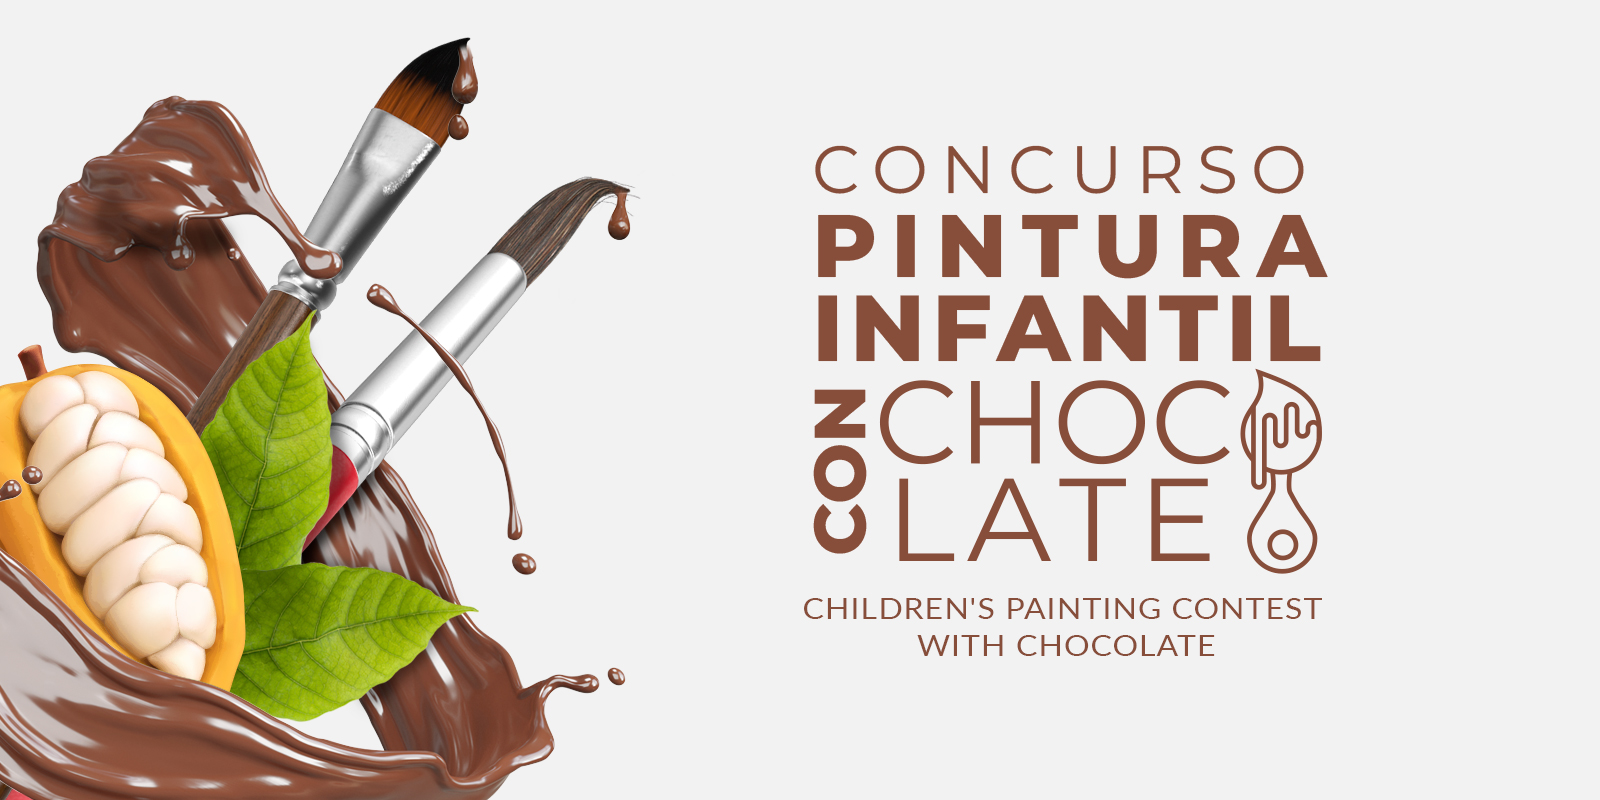 Children's painting with chocolate